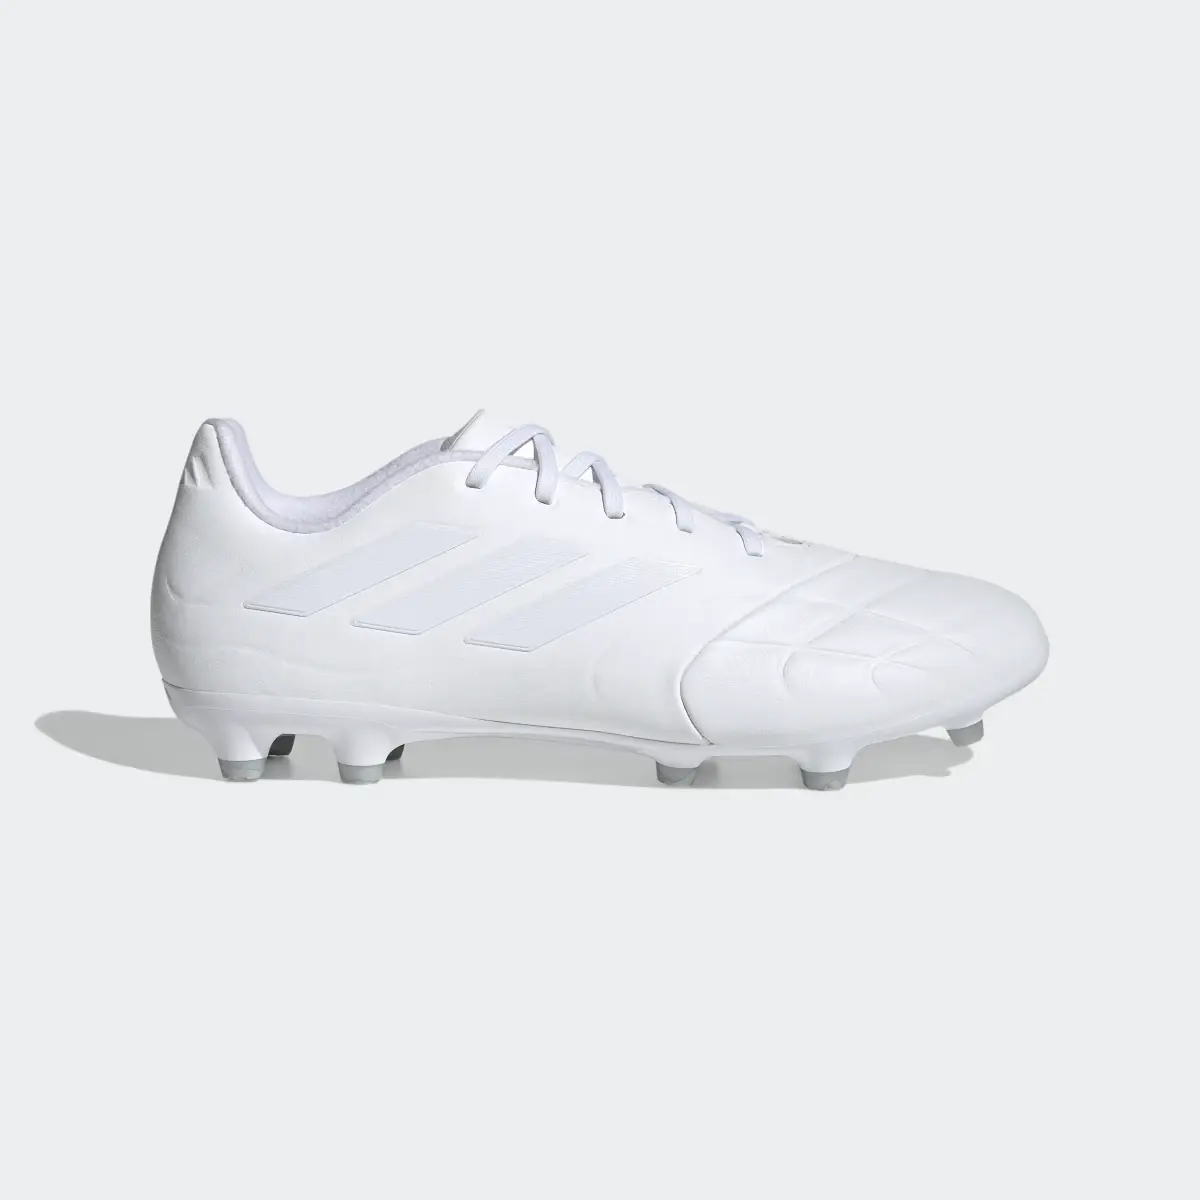 Adidas Copa Pure.3 Firm Ground Boots. 2